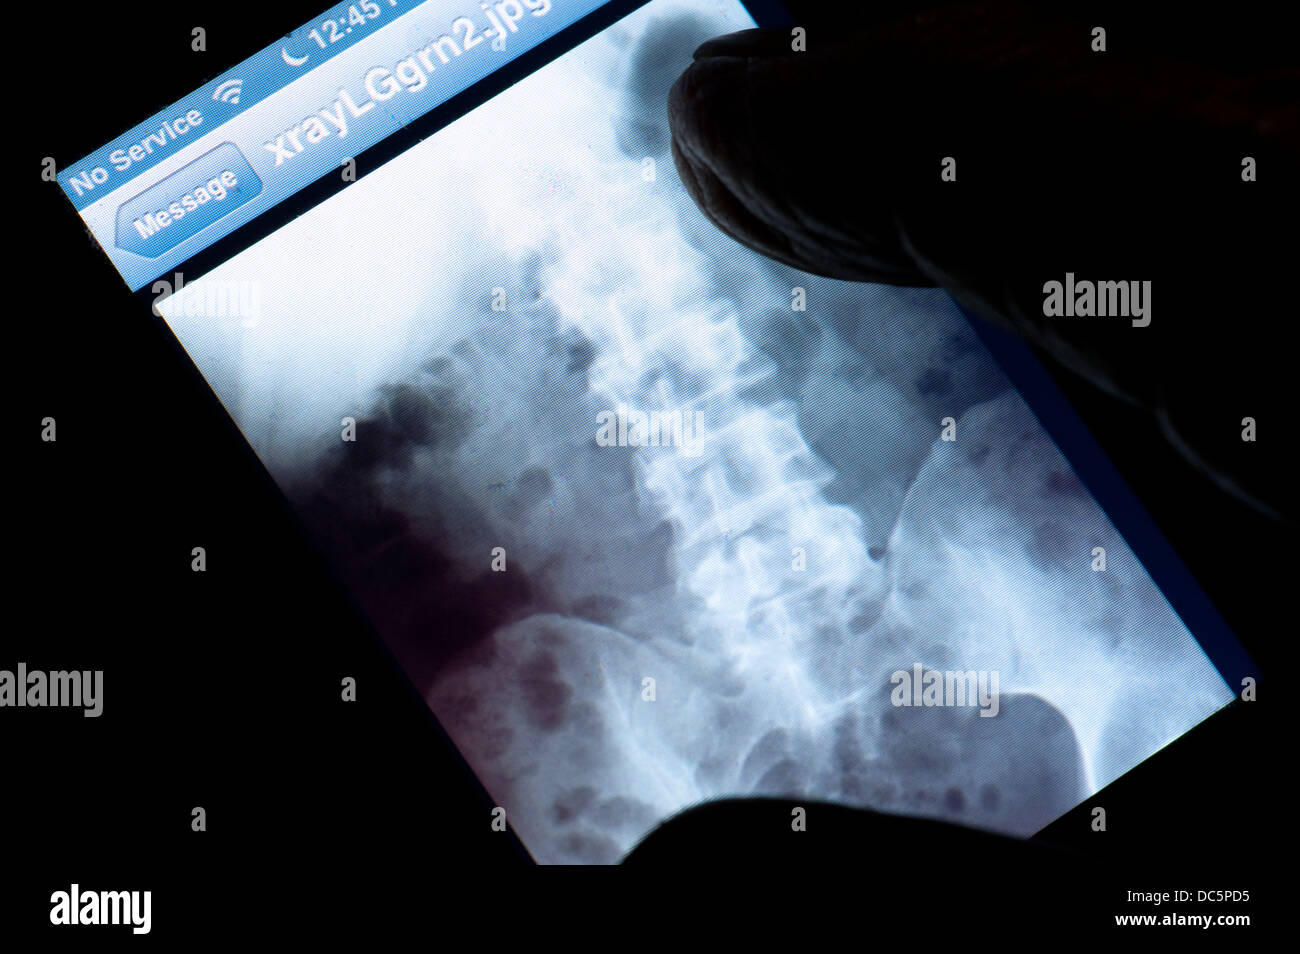 iPhone with closeup X-ray image Stock Photo